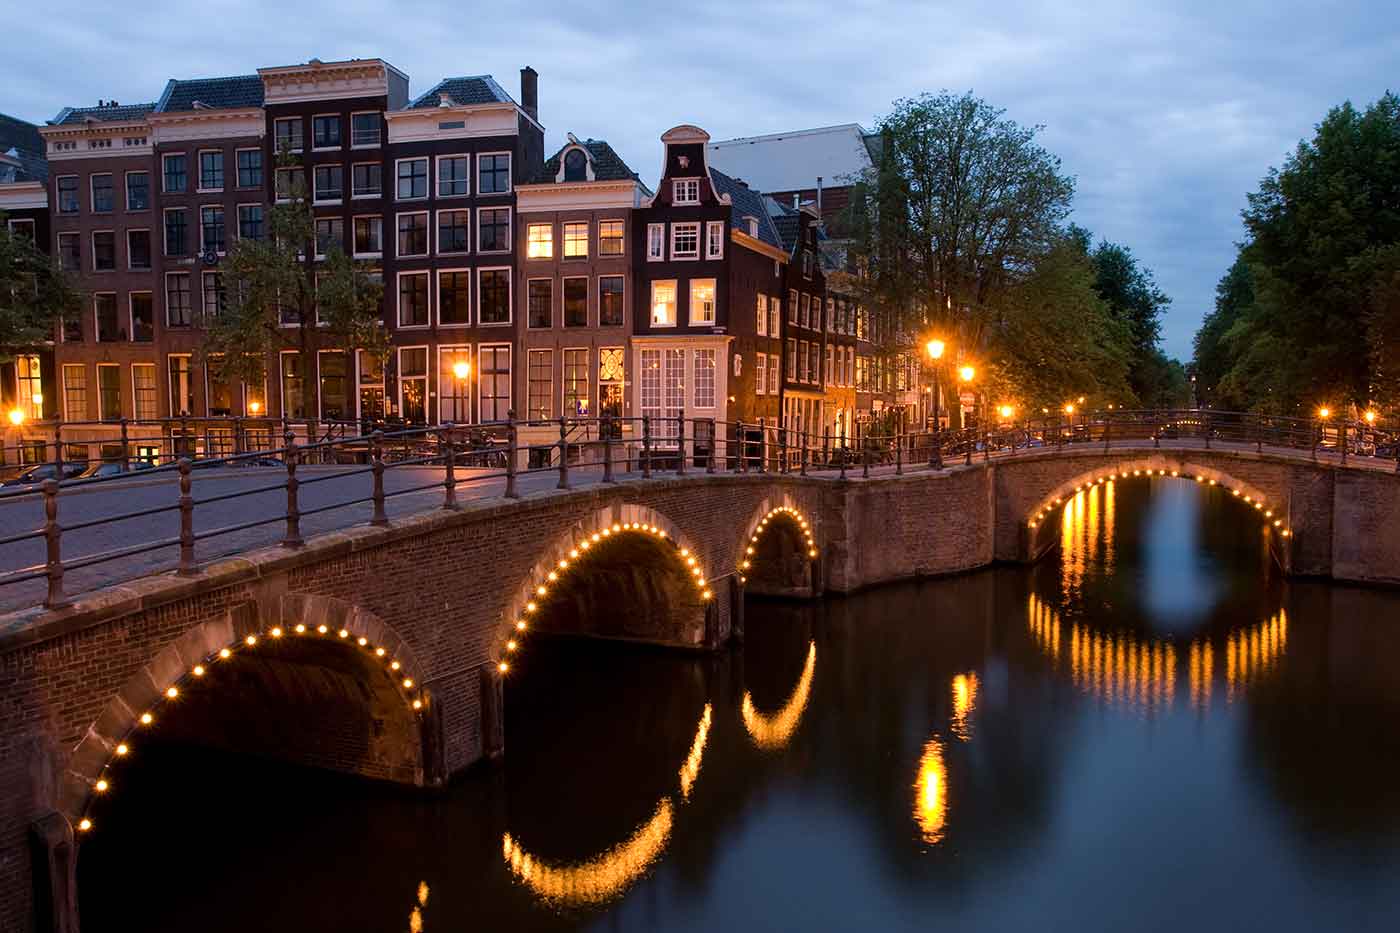 A view of the Reguliersgracht on the corner with the Keizersgracht, in Amsterdam, the Netherlands at dusk.